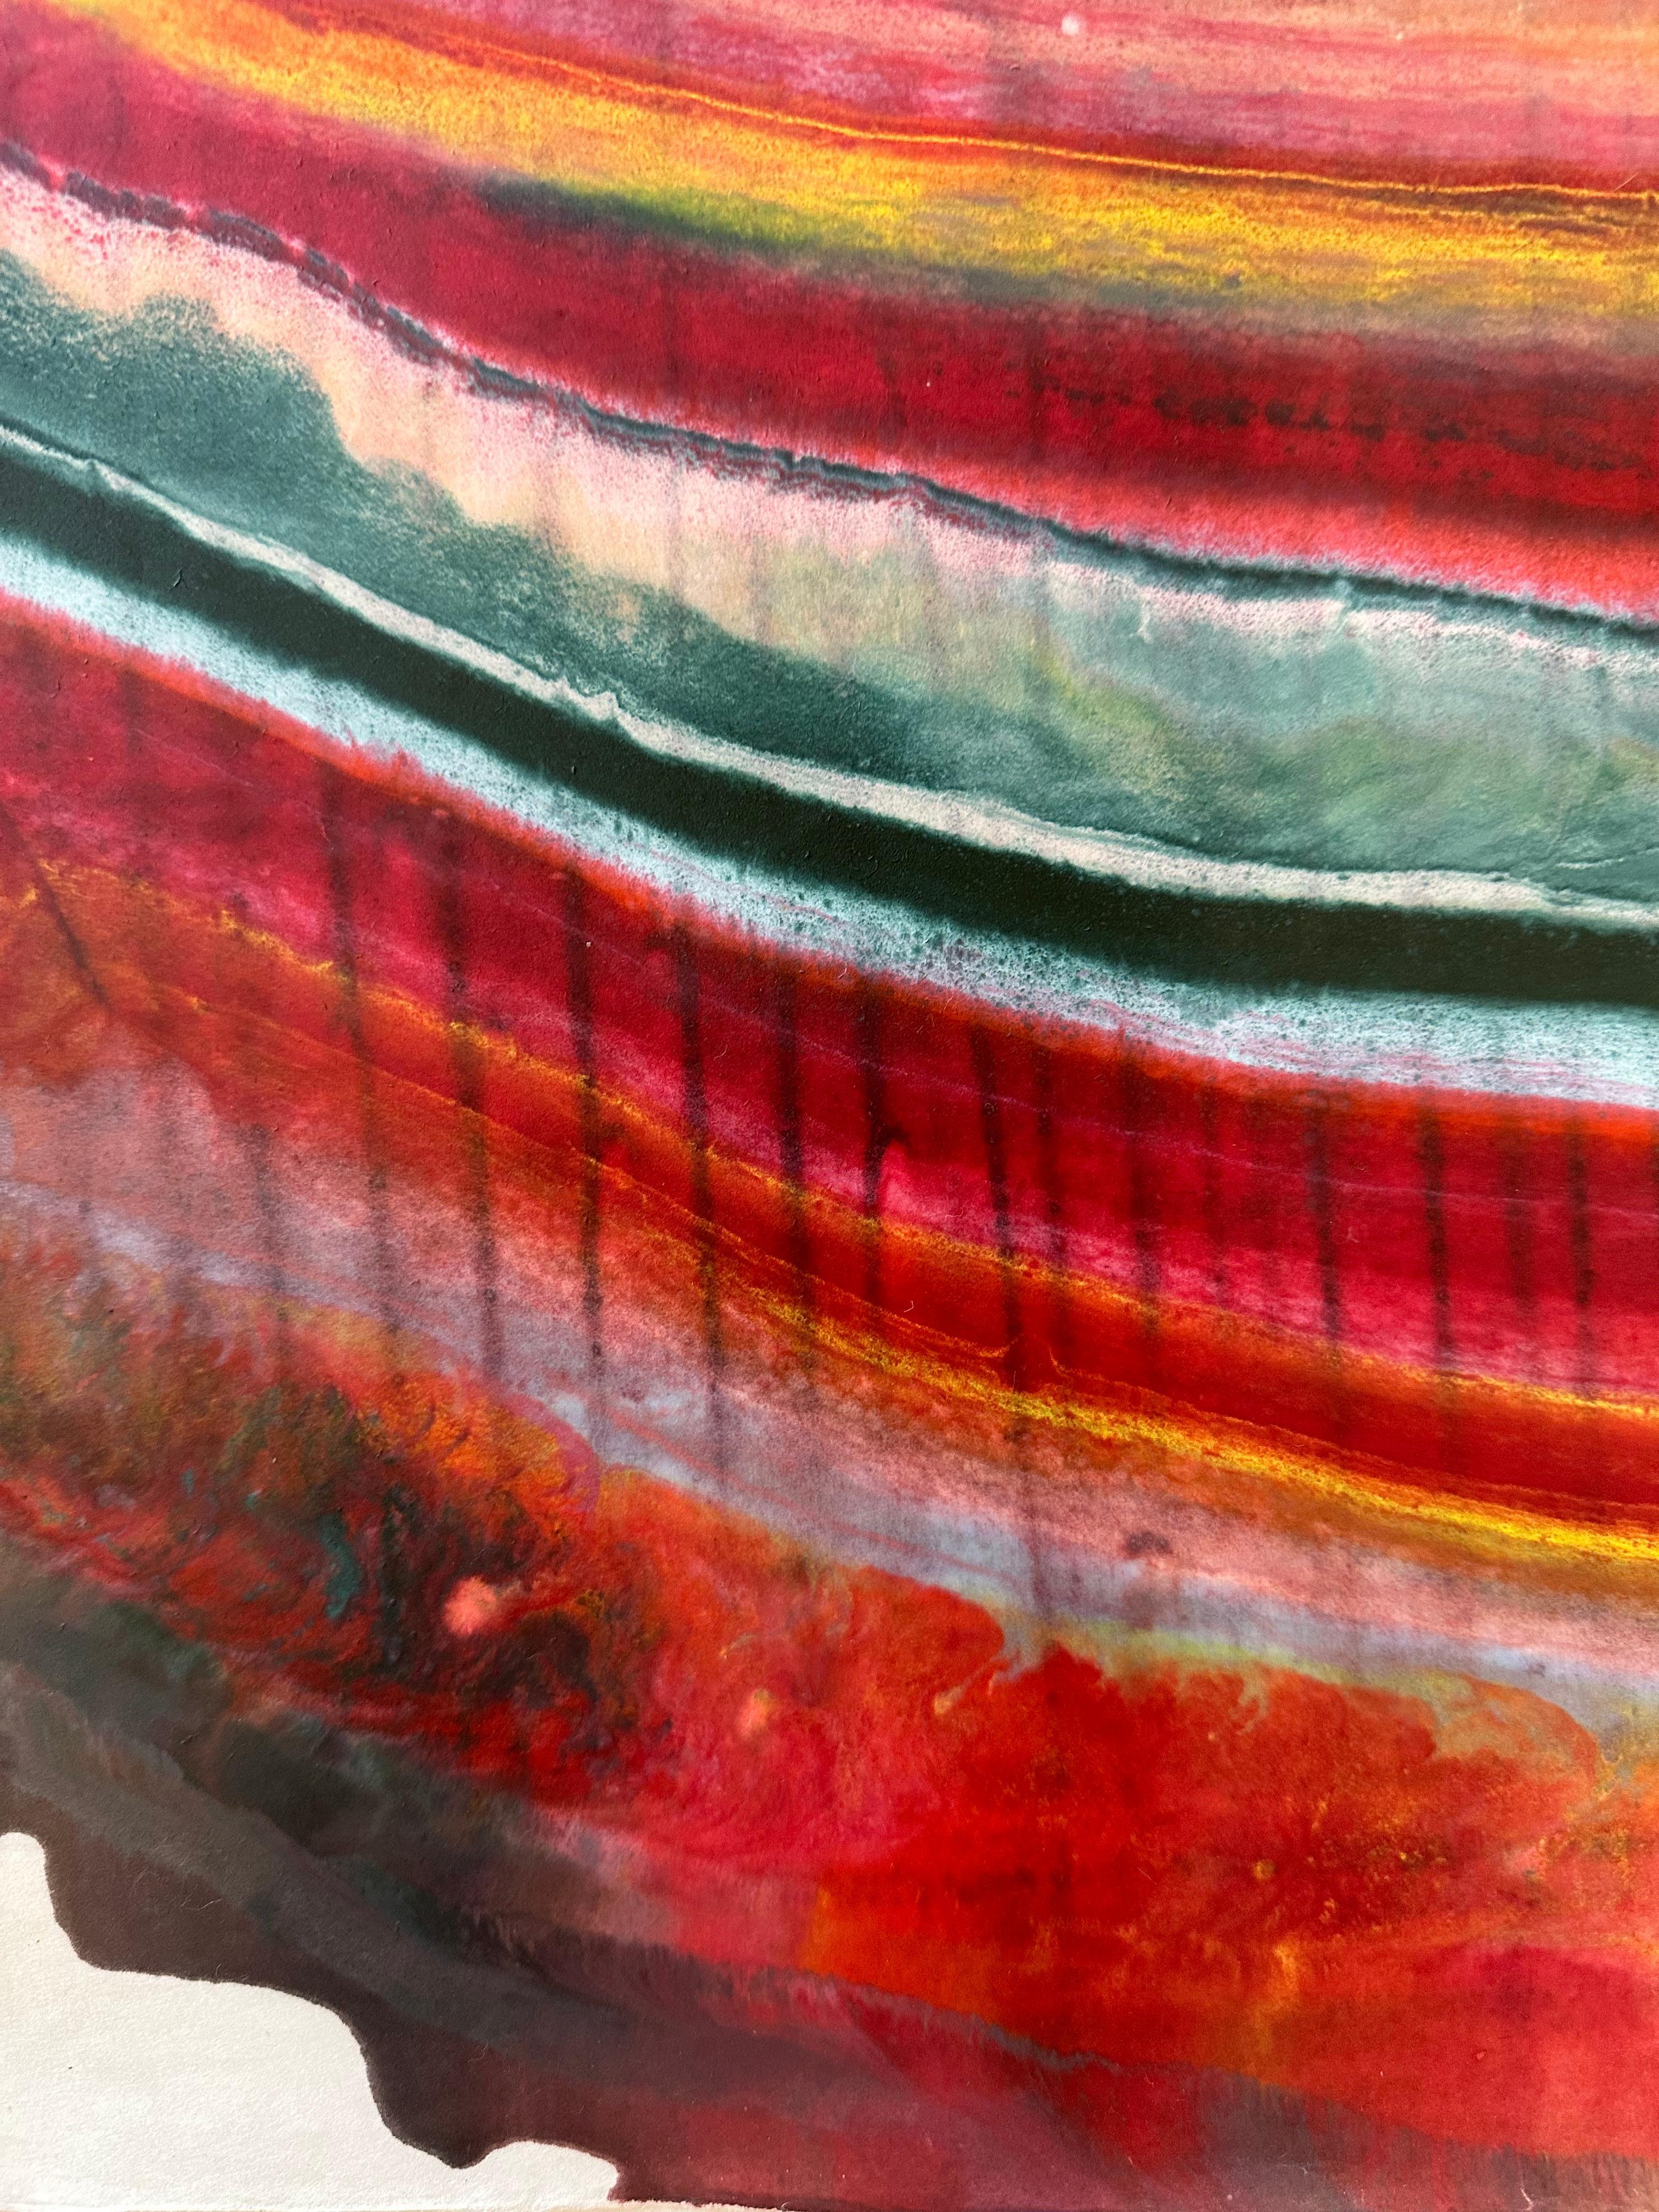 Talking to Rocks 23, Magenta Red, Sky Blue, Orange Abstract Encaustic Monotype - Contemporary Print by Laura Moriarty